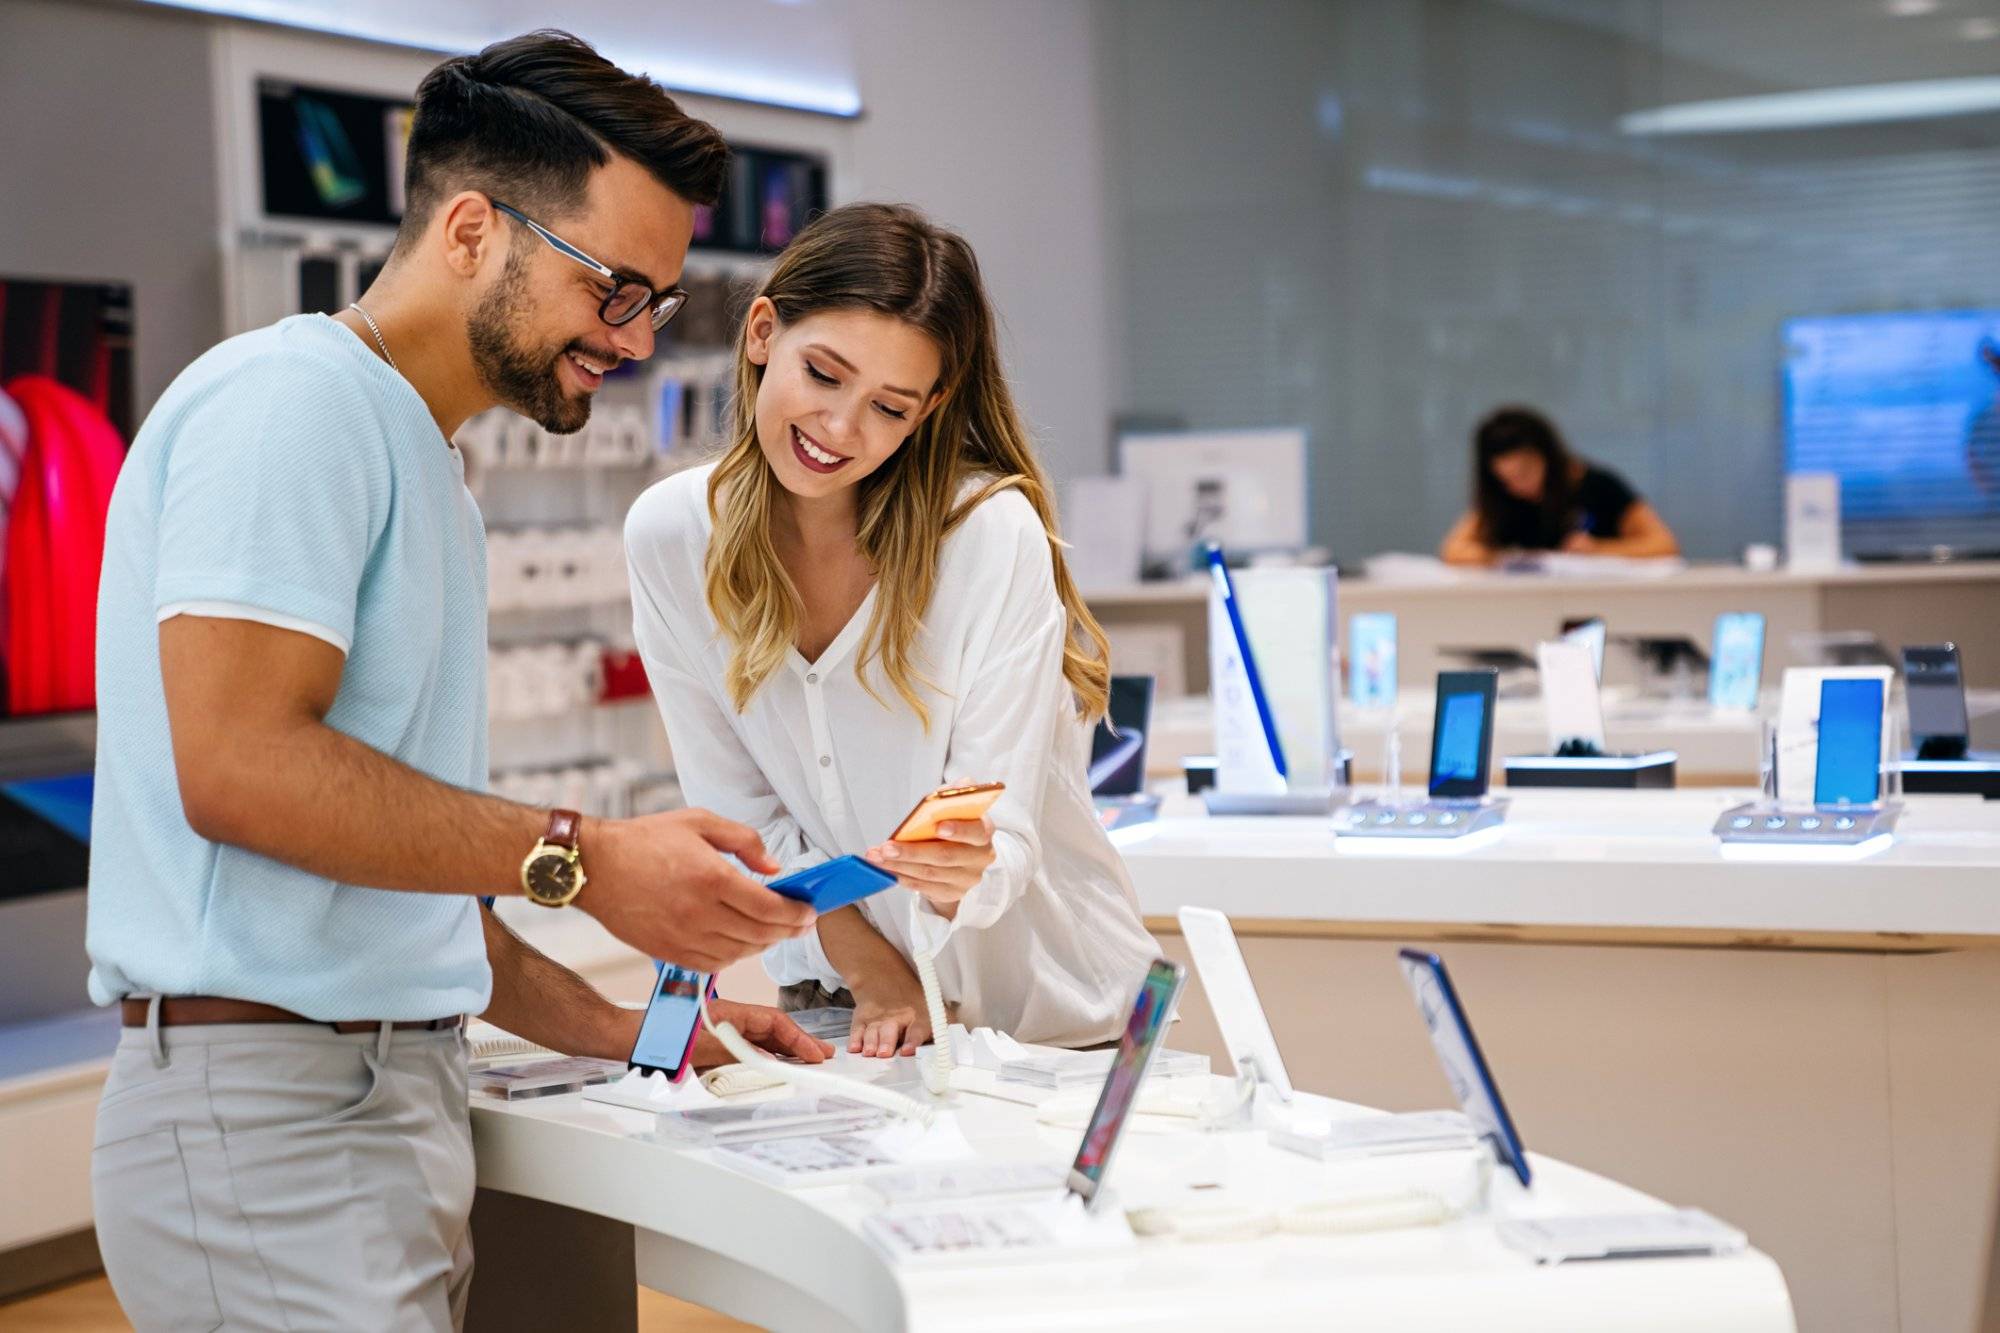 Stay Connected with Cutting-Edge Technology at the Austin AT&T Store